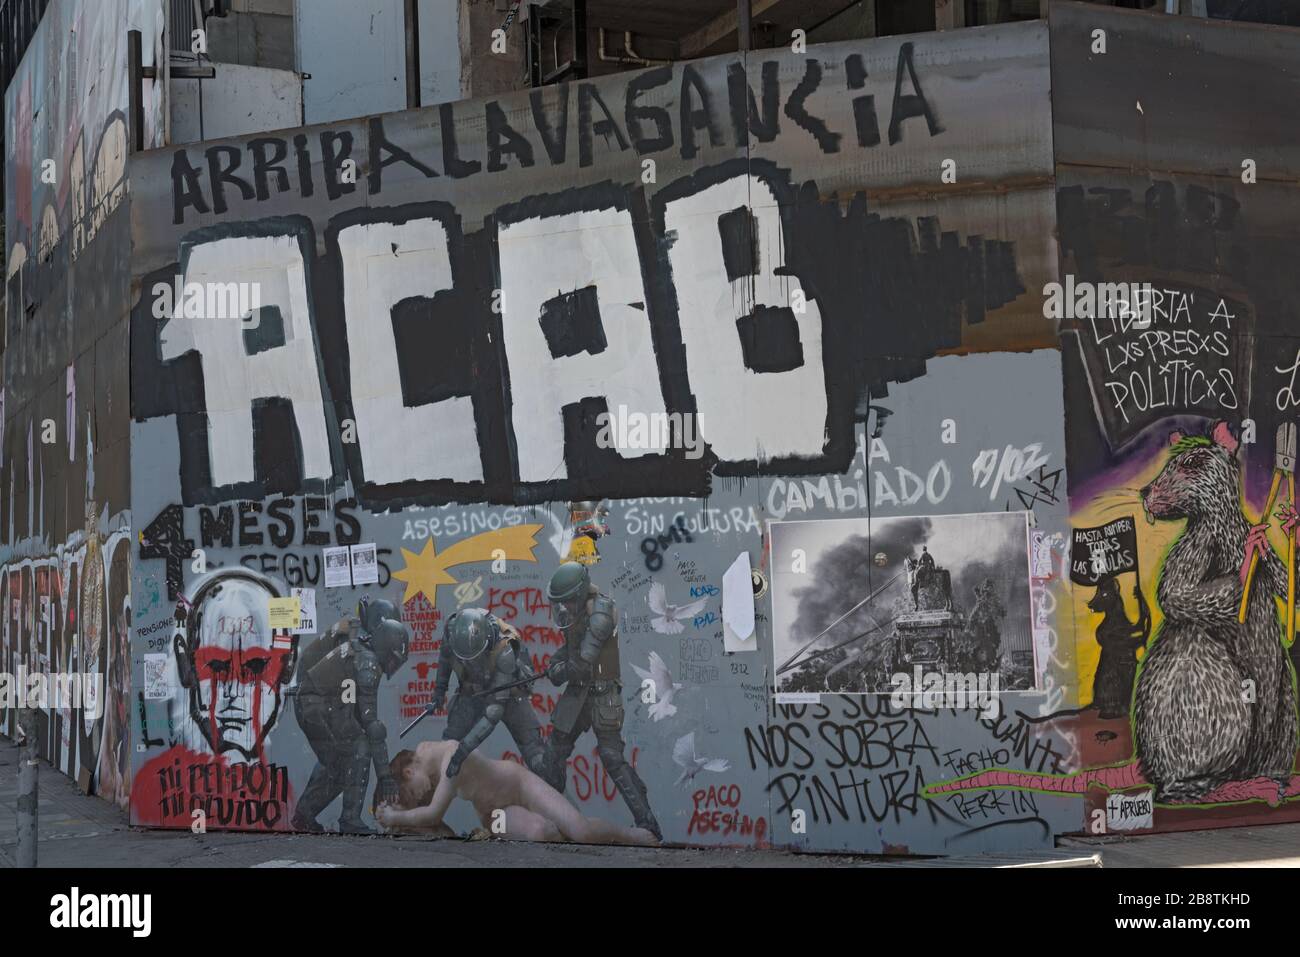 Graffiti of the political unrest and protests in Santiago, Chile Stock Photo